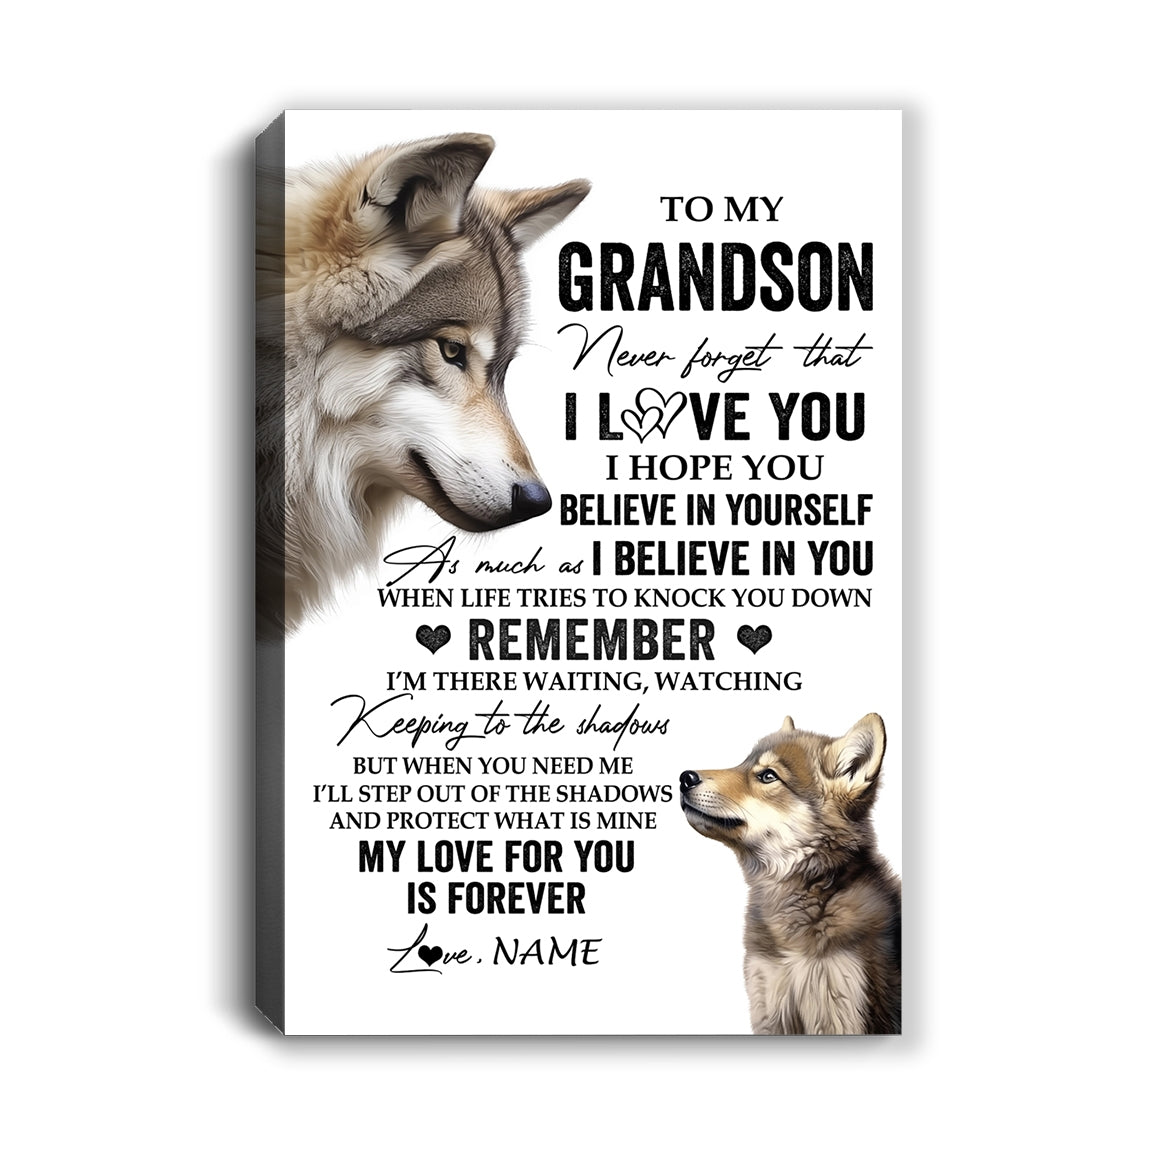 Personalized_To_My_Grandson_Canvas_From_Grandma_Grandpa_Wolf_My_Love_For_You_Is_Forever_Grandson_Birthday_Gifts_Graduation_Christmas_Custom_Wall_Art_Print_Framed_Canvas_Canvas_mockup-1.jpg